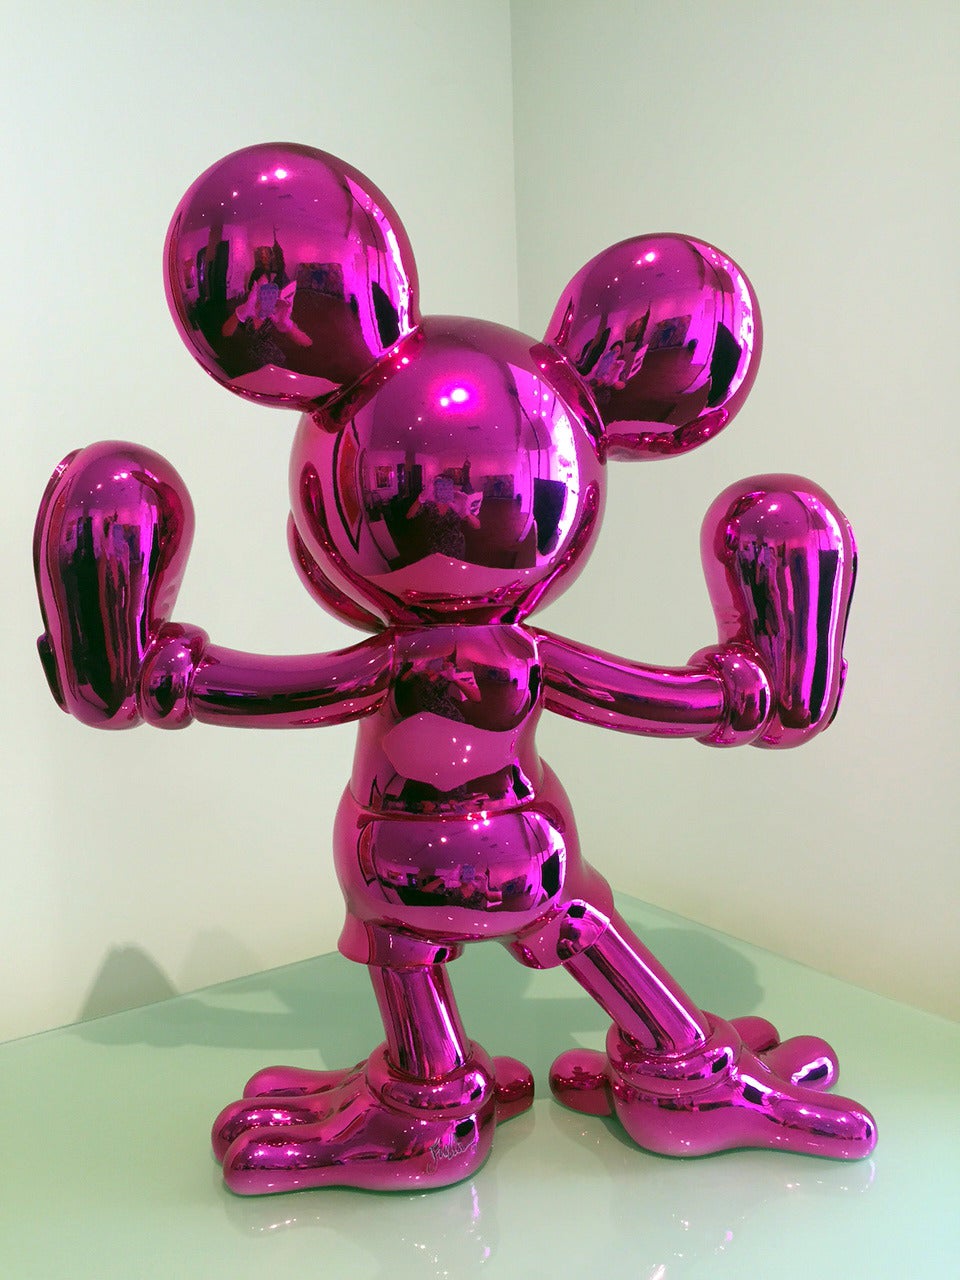 Original Contemporary Sculpture made of resin with Pink Aluminum Varnish by Fadia Falaschetti. The 